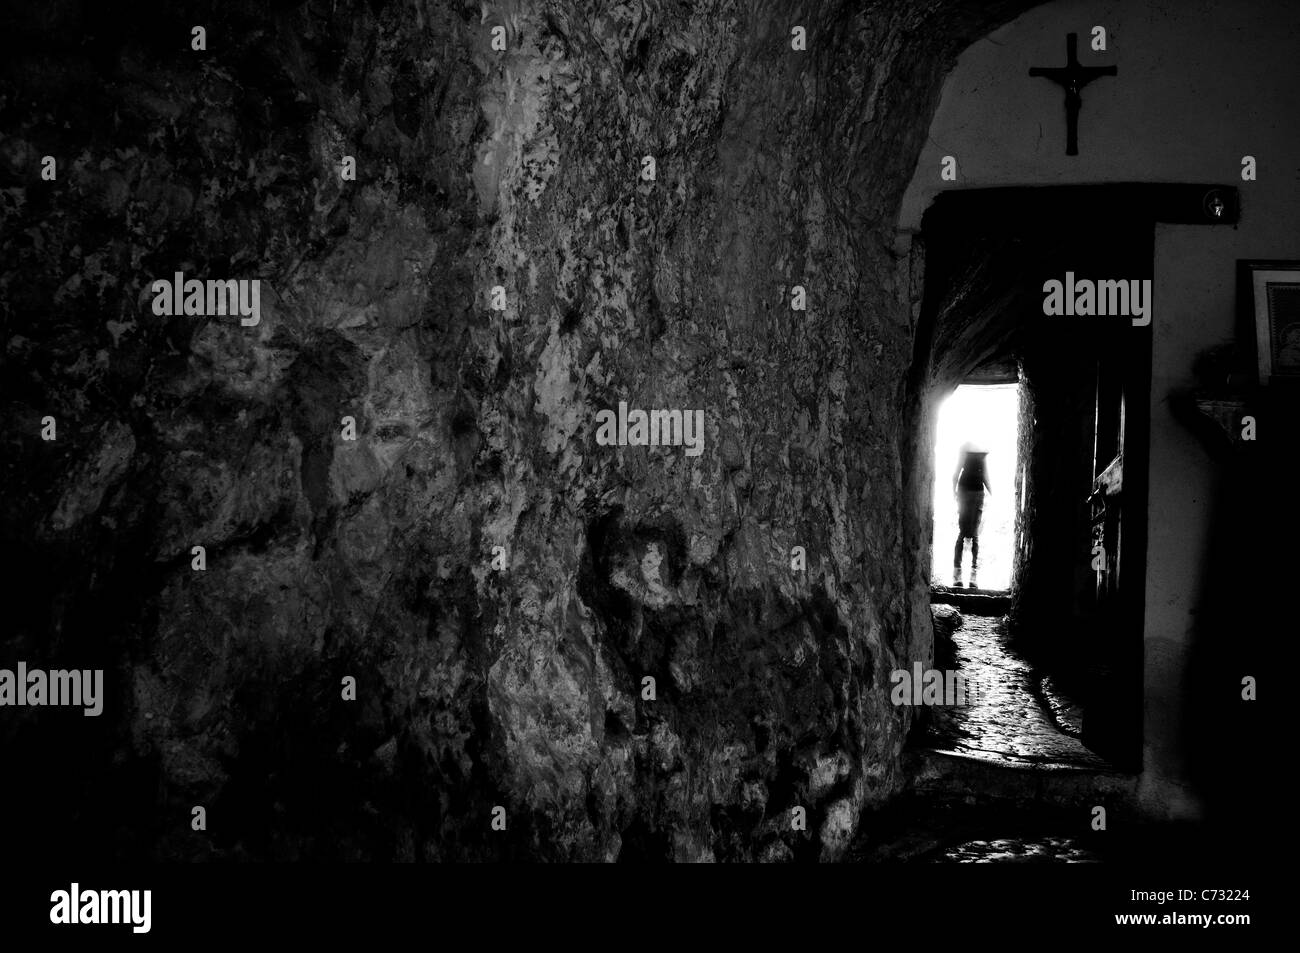 Hermitage carved into the rock room with crucifix and witch silhouette Stock Photo